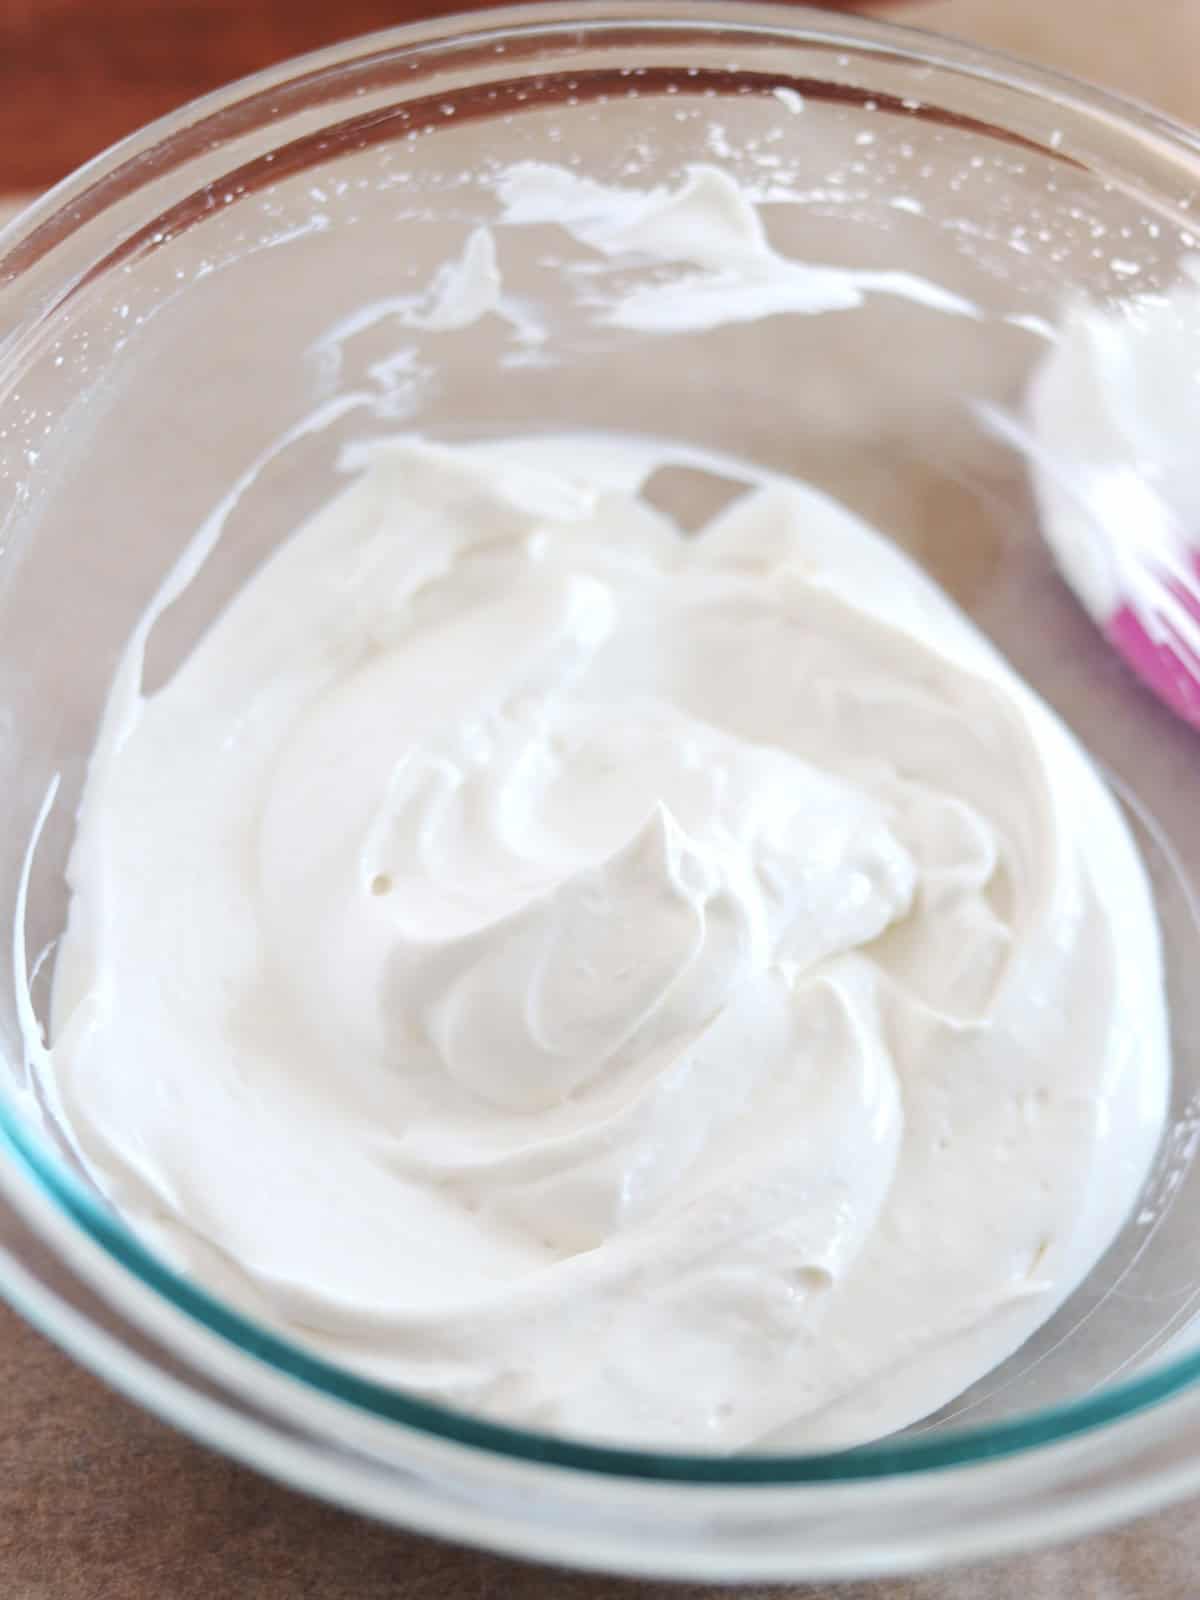 Whipped Greek yogurt in a glass mixing bowl on a parchment paper lined table.